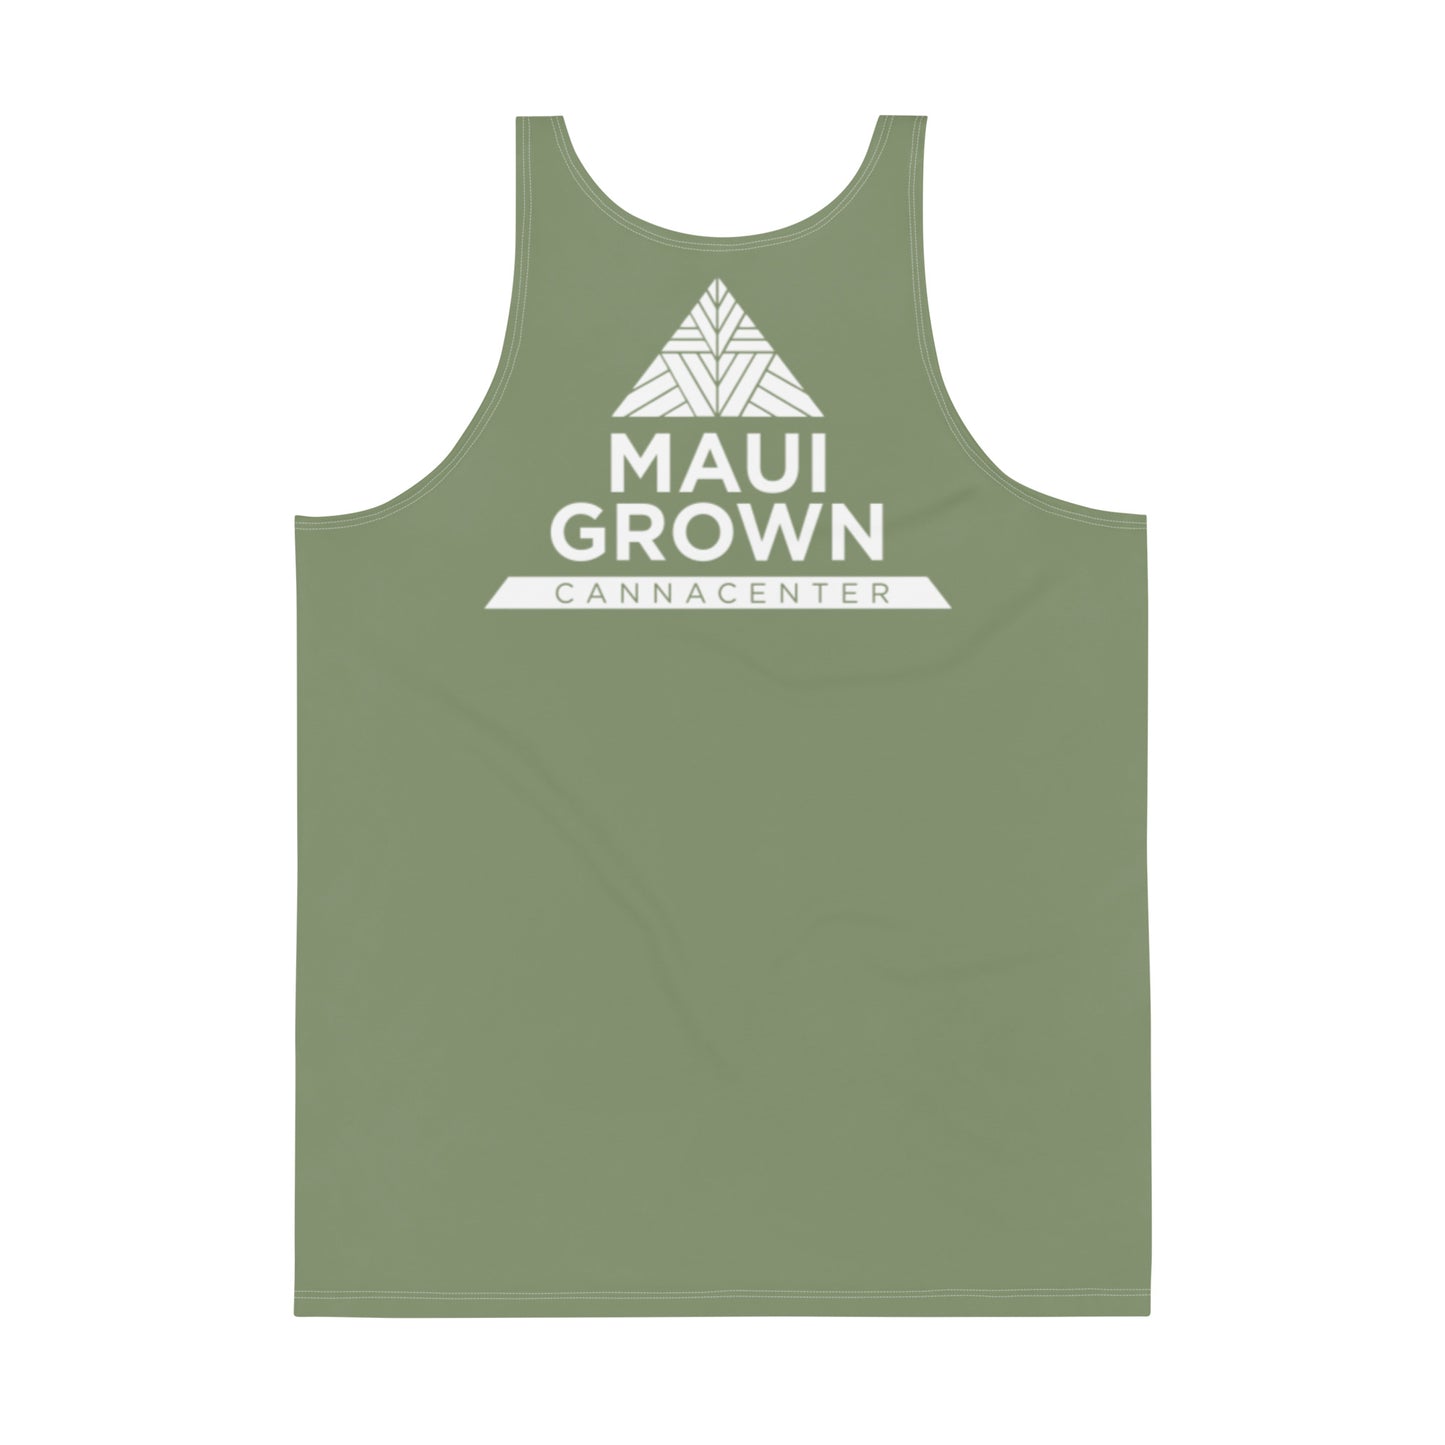 Maui Grown Cannacenter Sublimated Unisex Tank Top - Camouflage Green